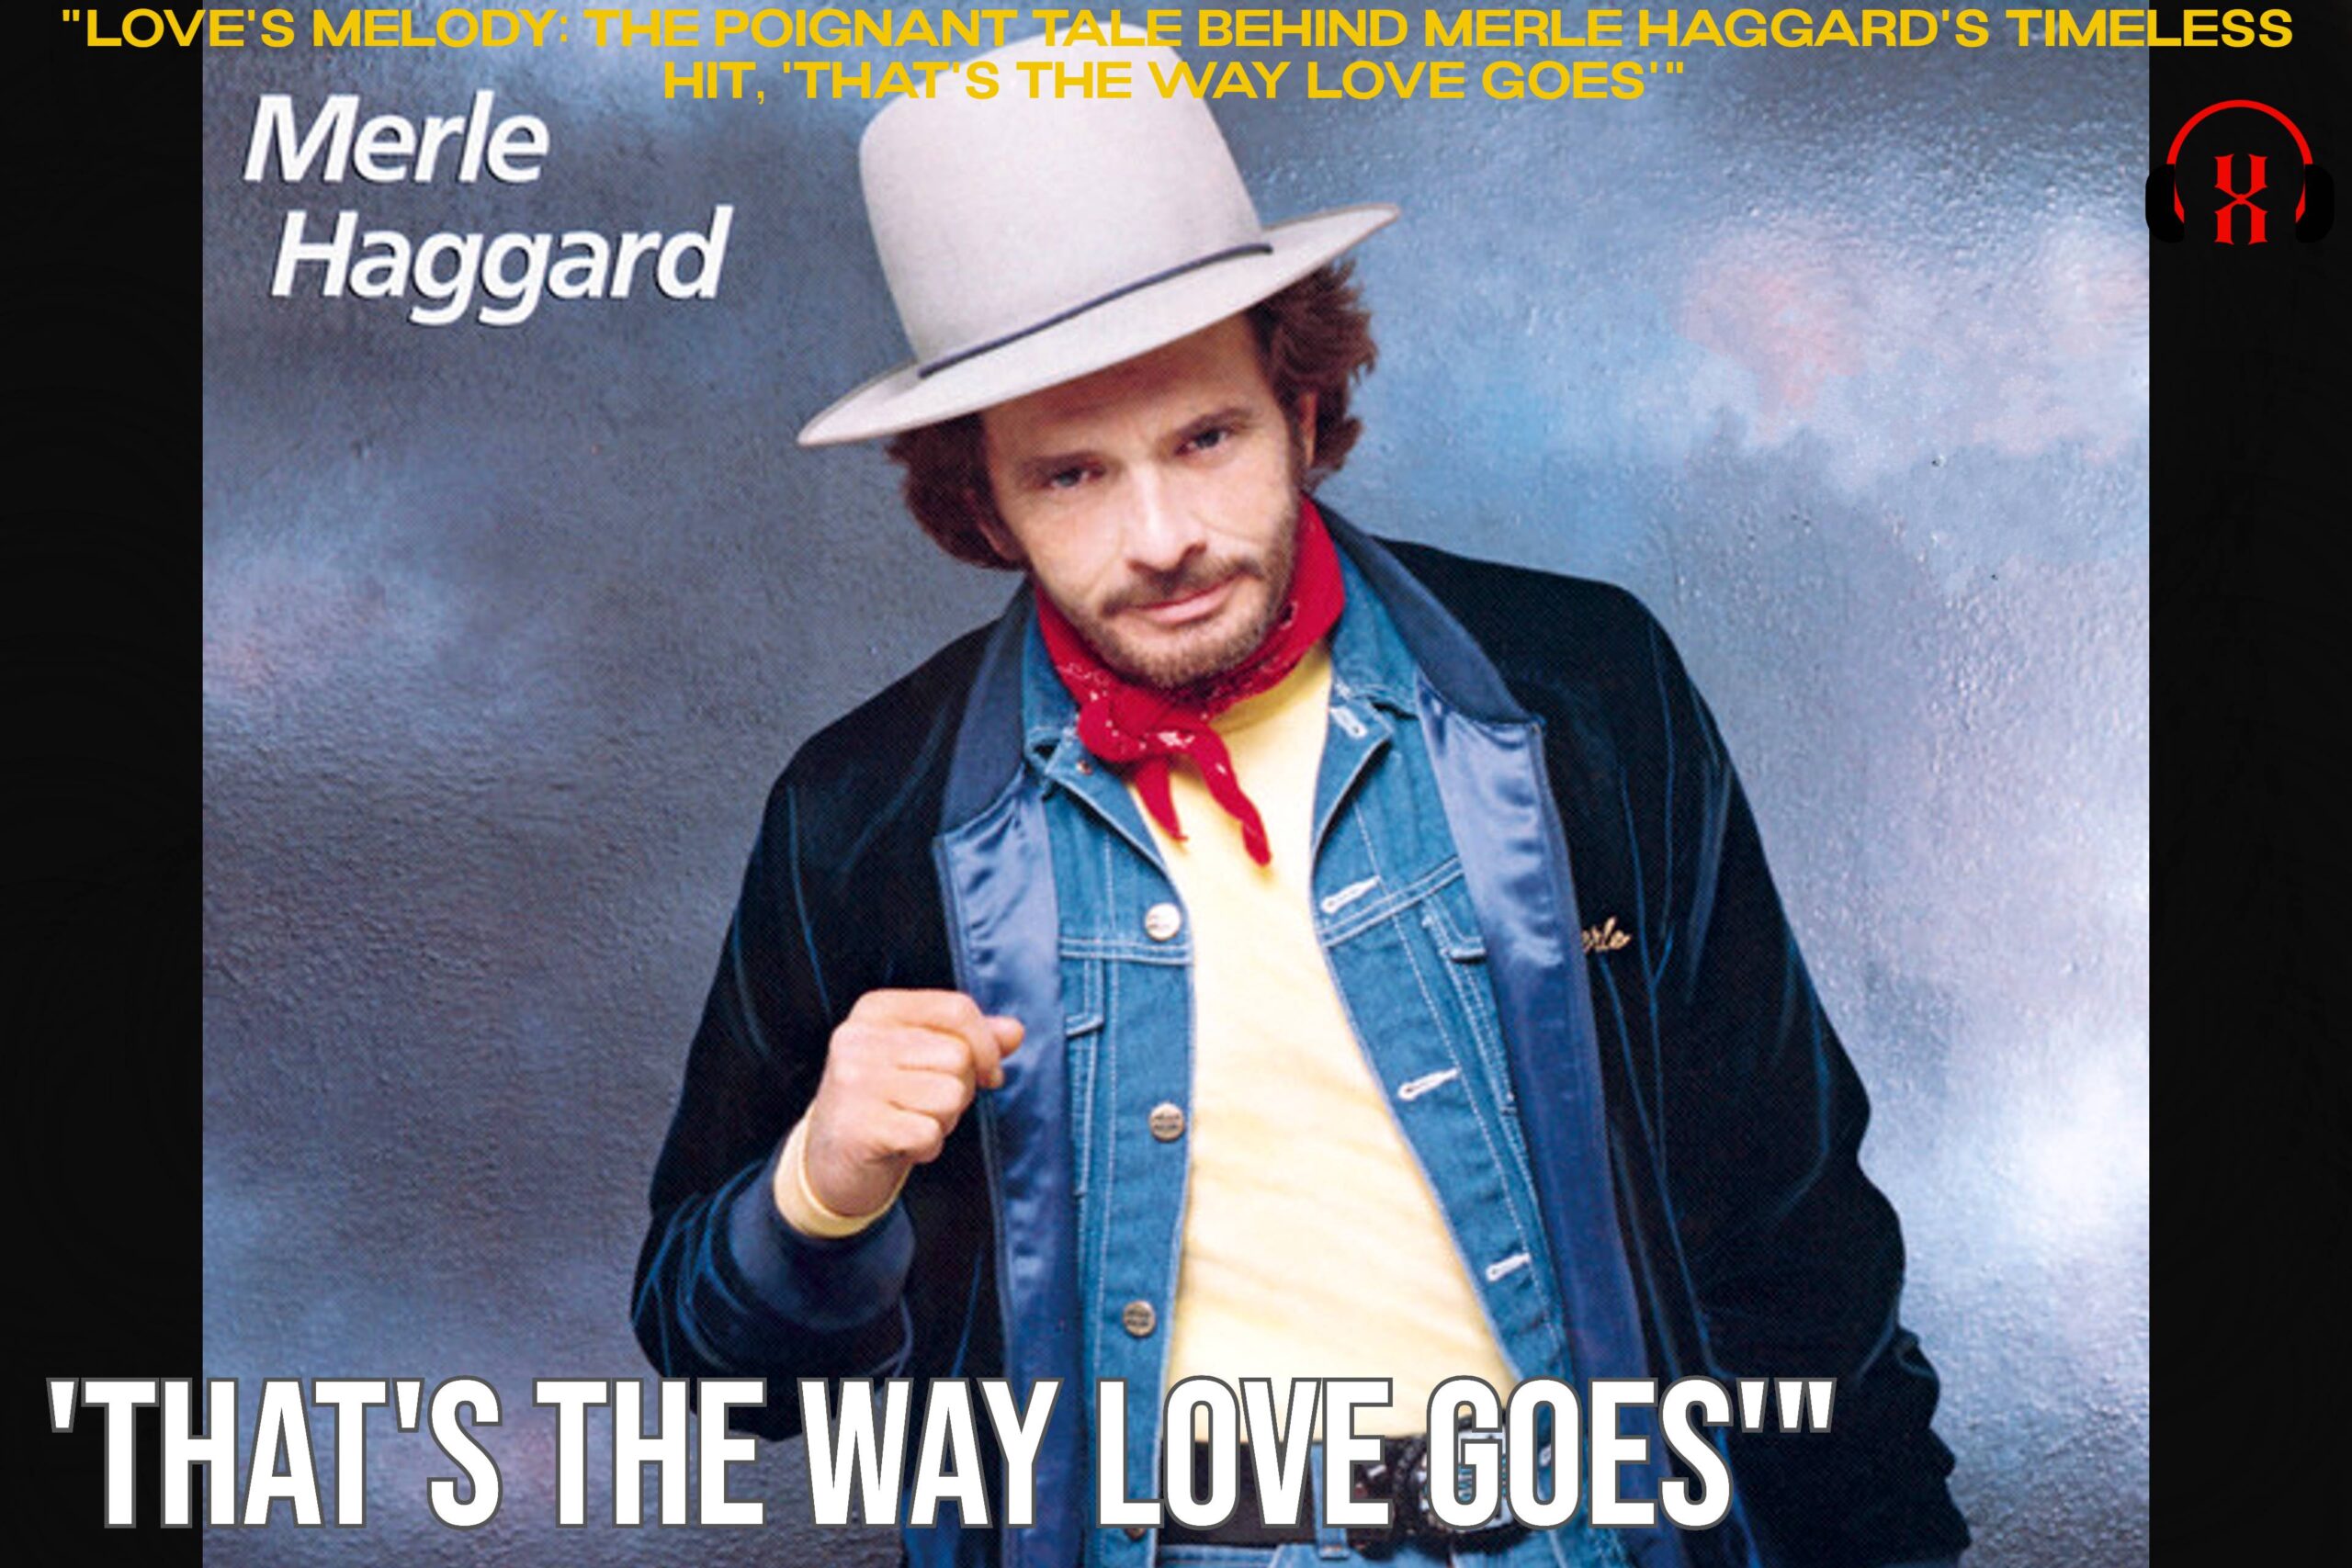 “Love’s Melody: The Poignant Tale Behind Merle Haggard’s Timeless Hit, ‘That’s the Way Love Goes'”